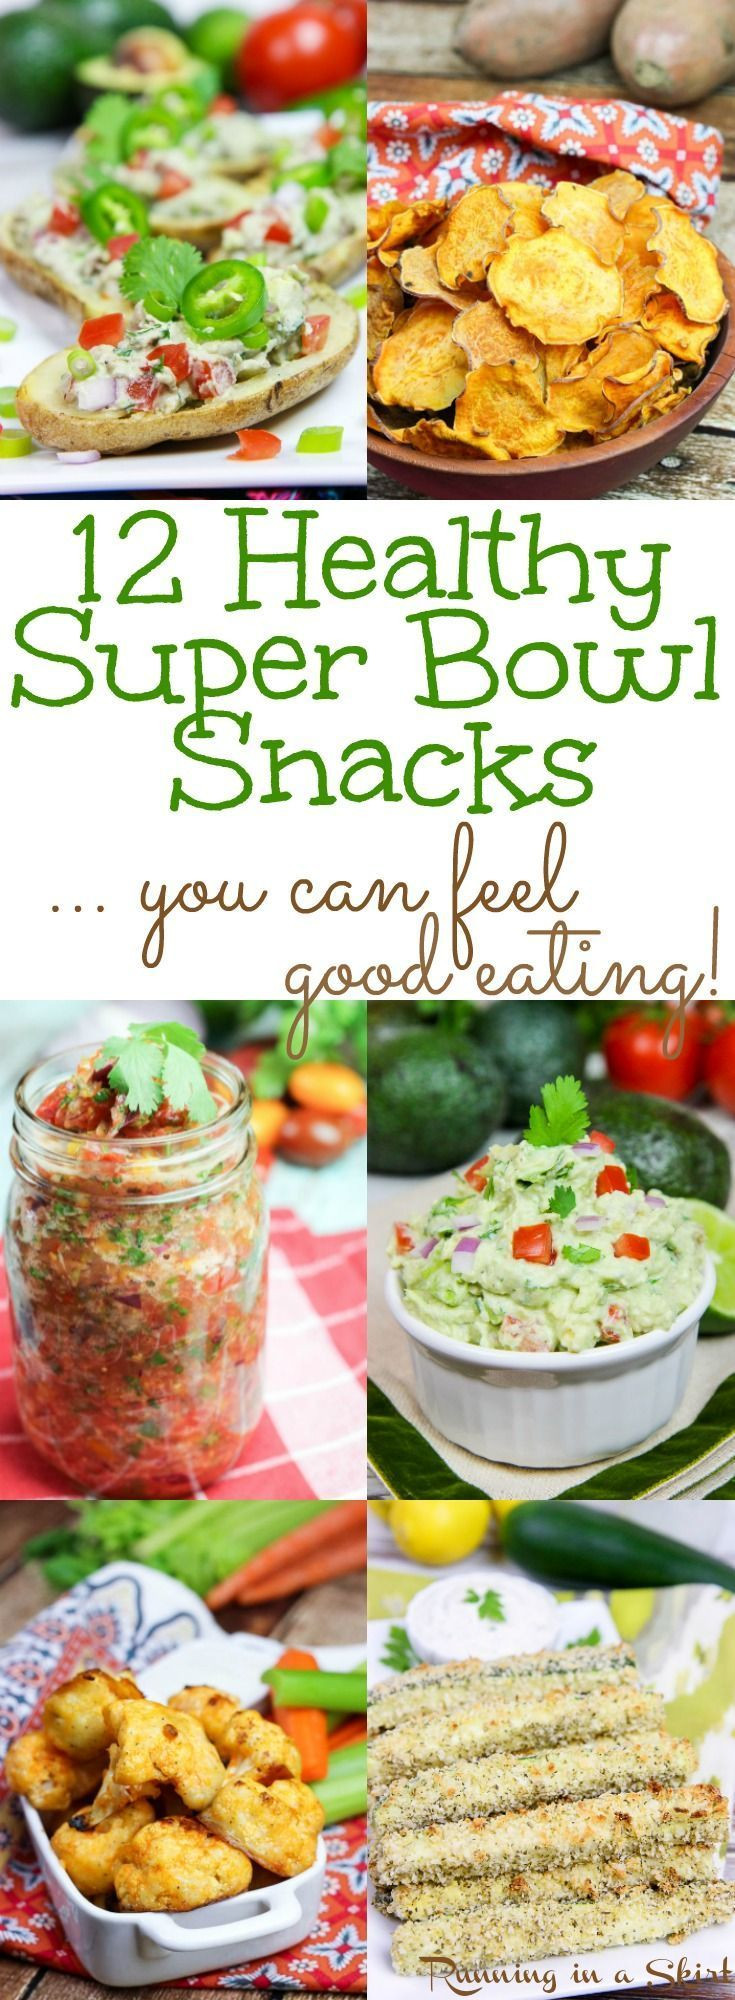 Healthy Football Party Snacks
 43 best images about healthier options on Pinterest